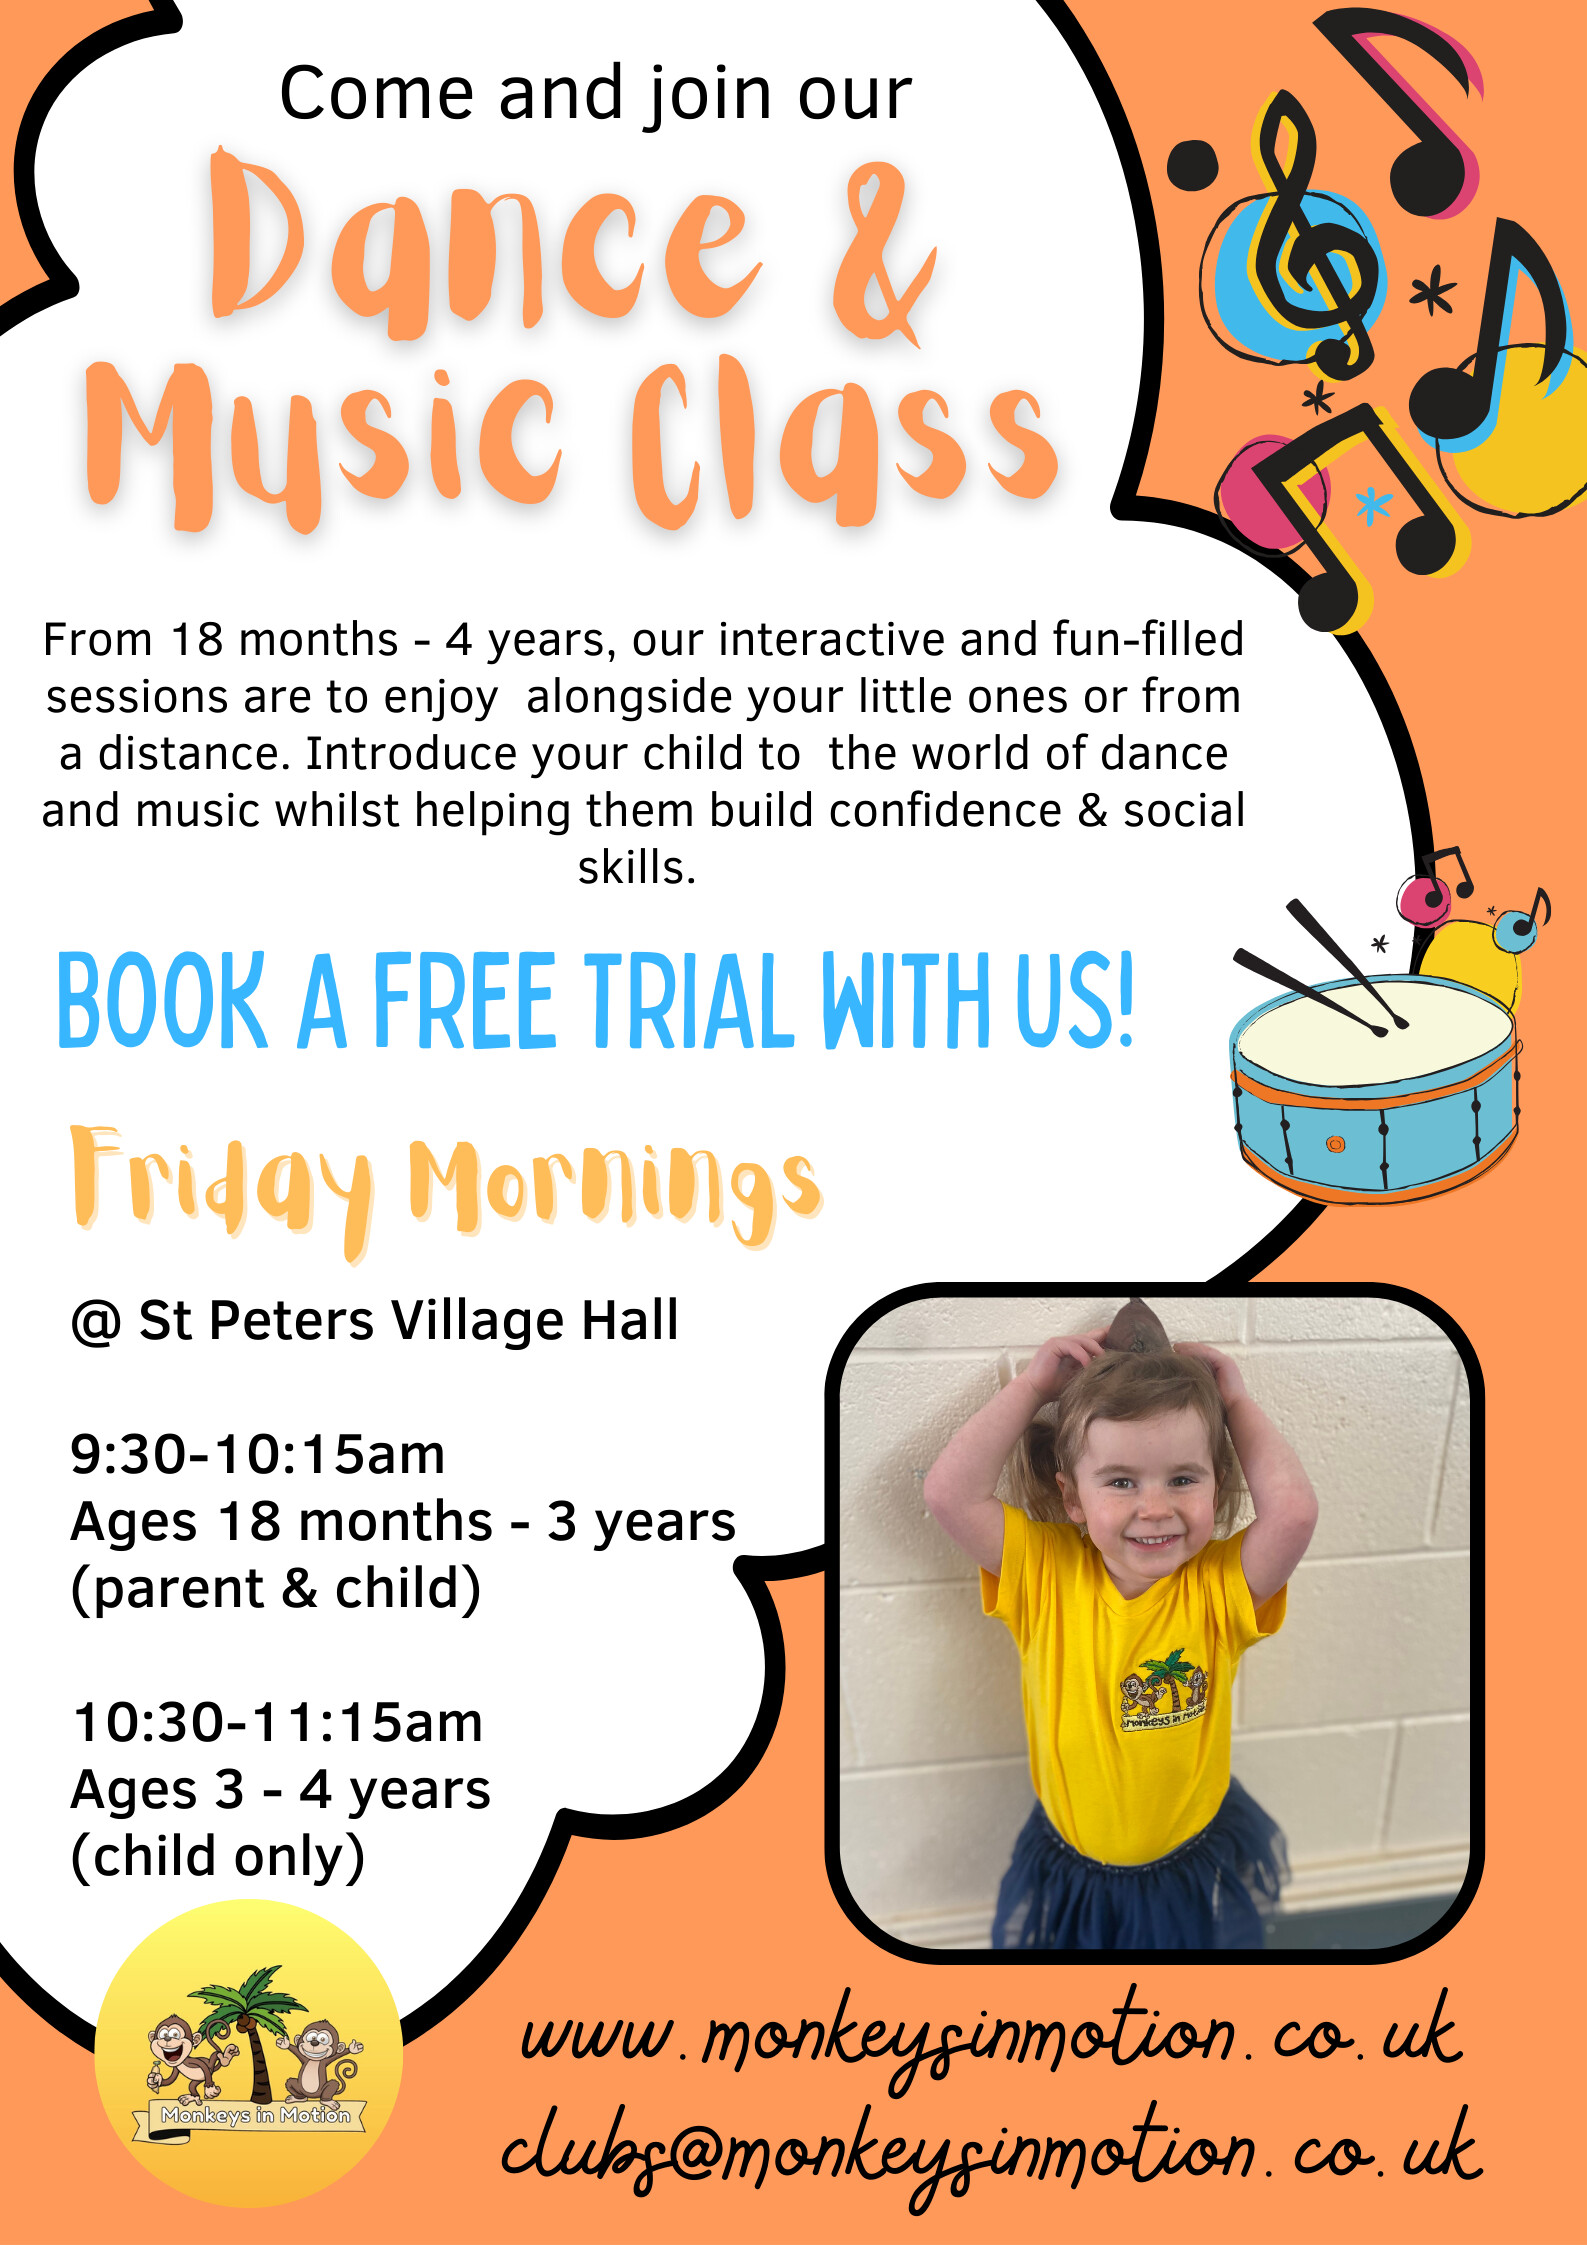 Diddy Monkeys Dance Classes – Friday Mornings